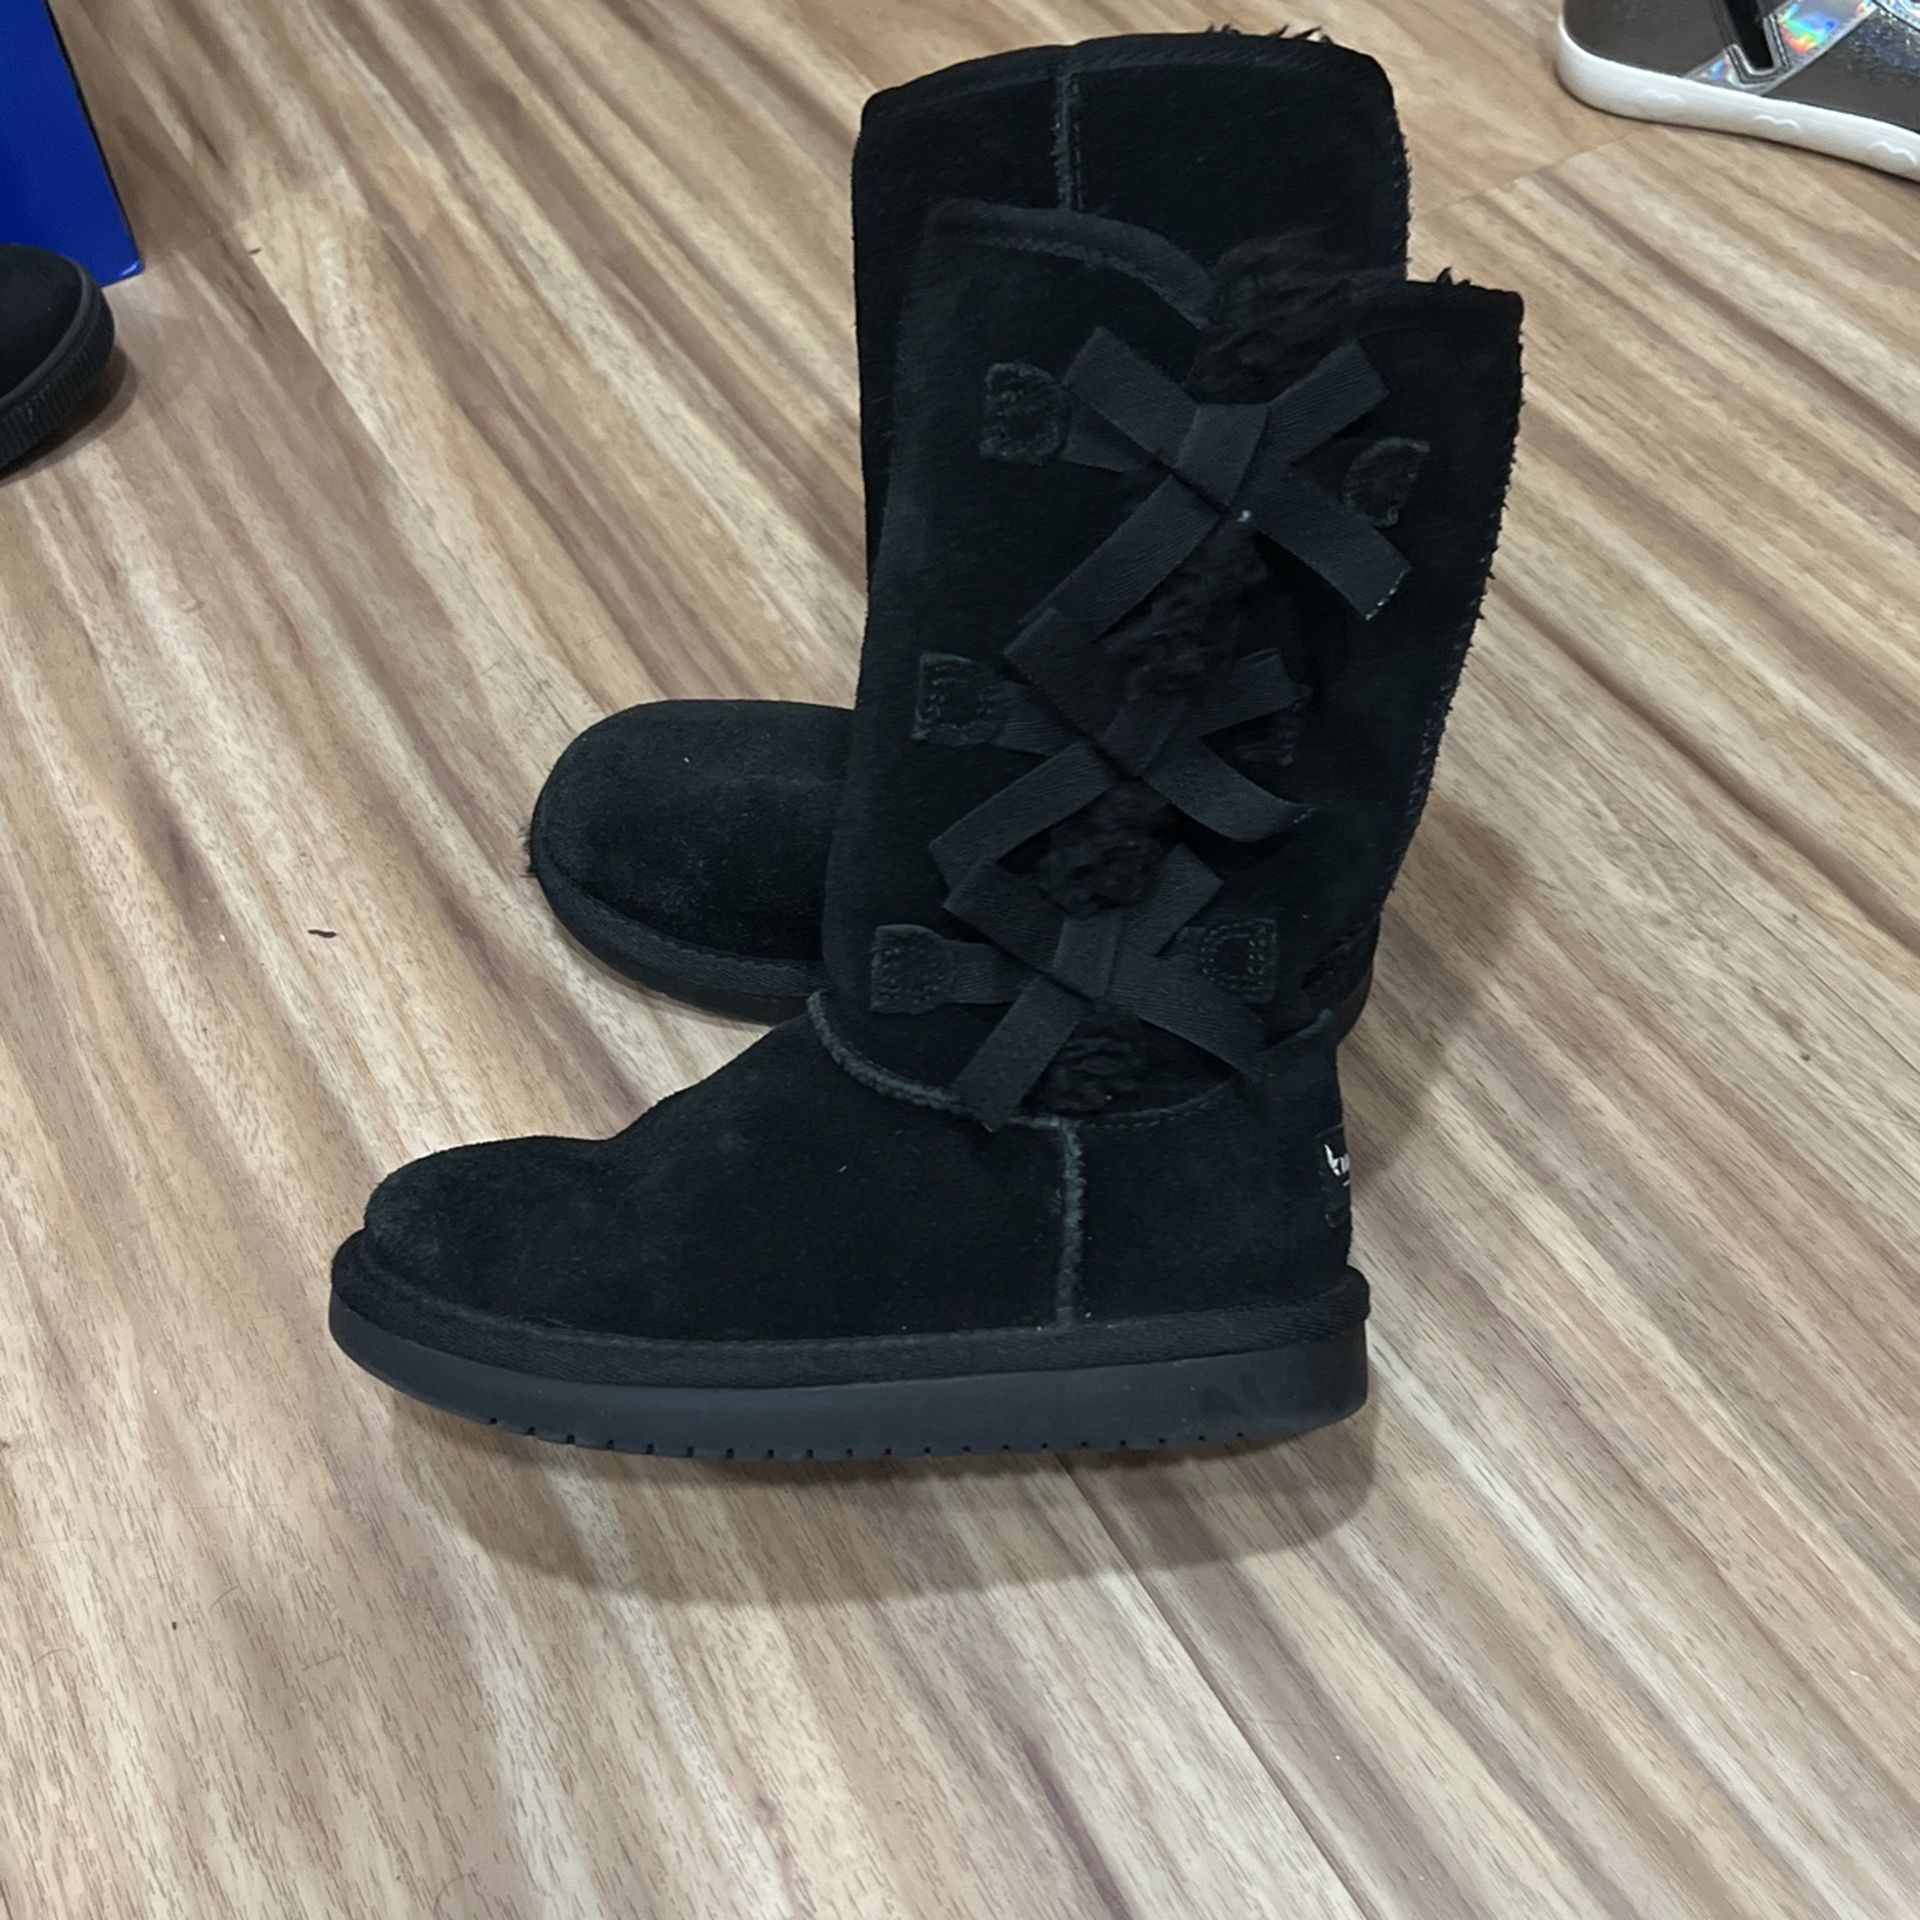 Girls Black Boots Size 12 